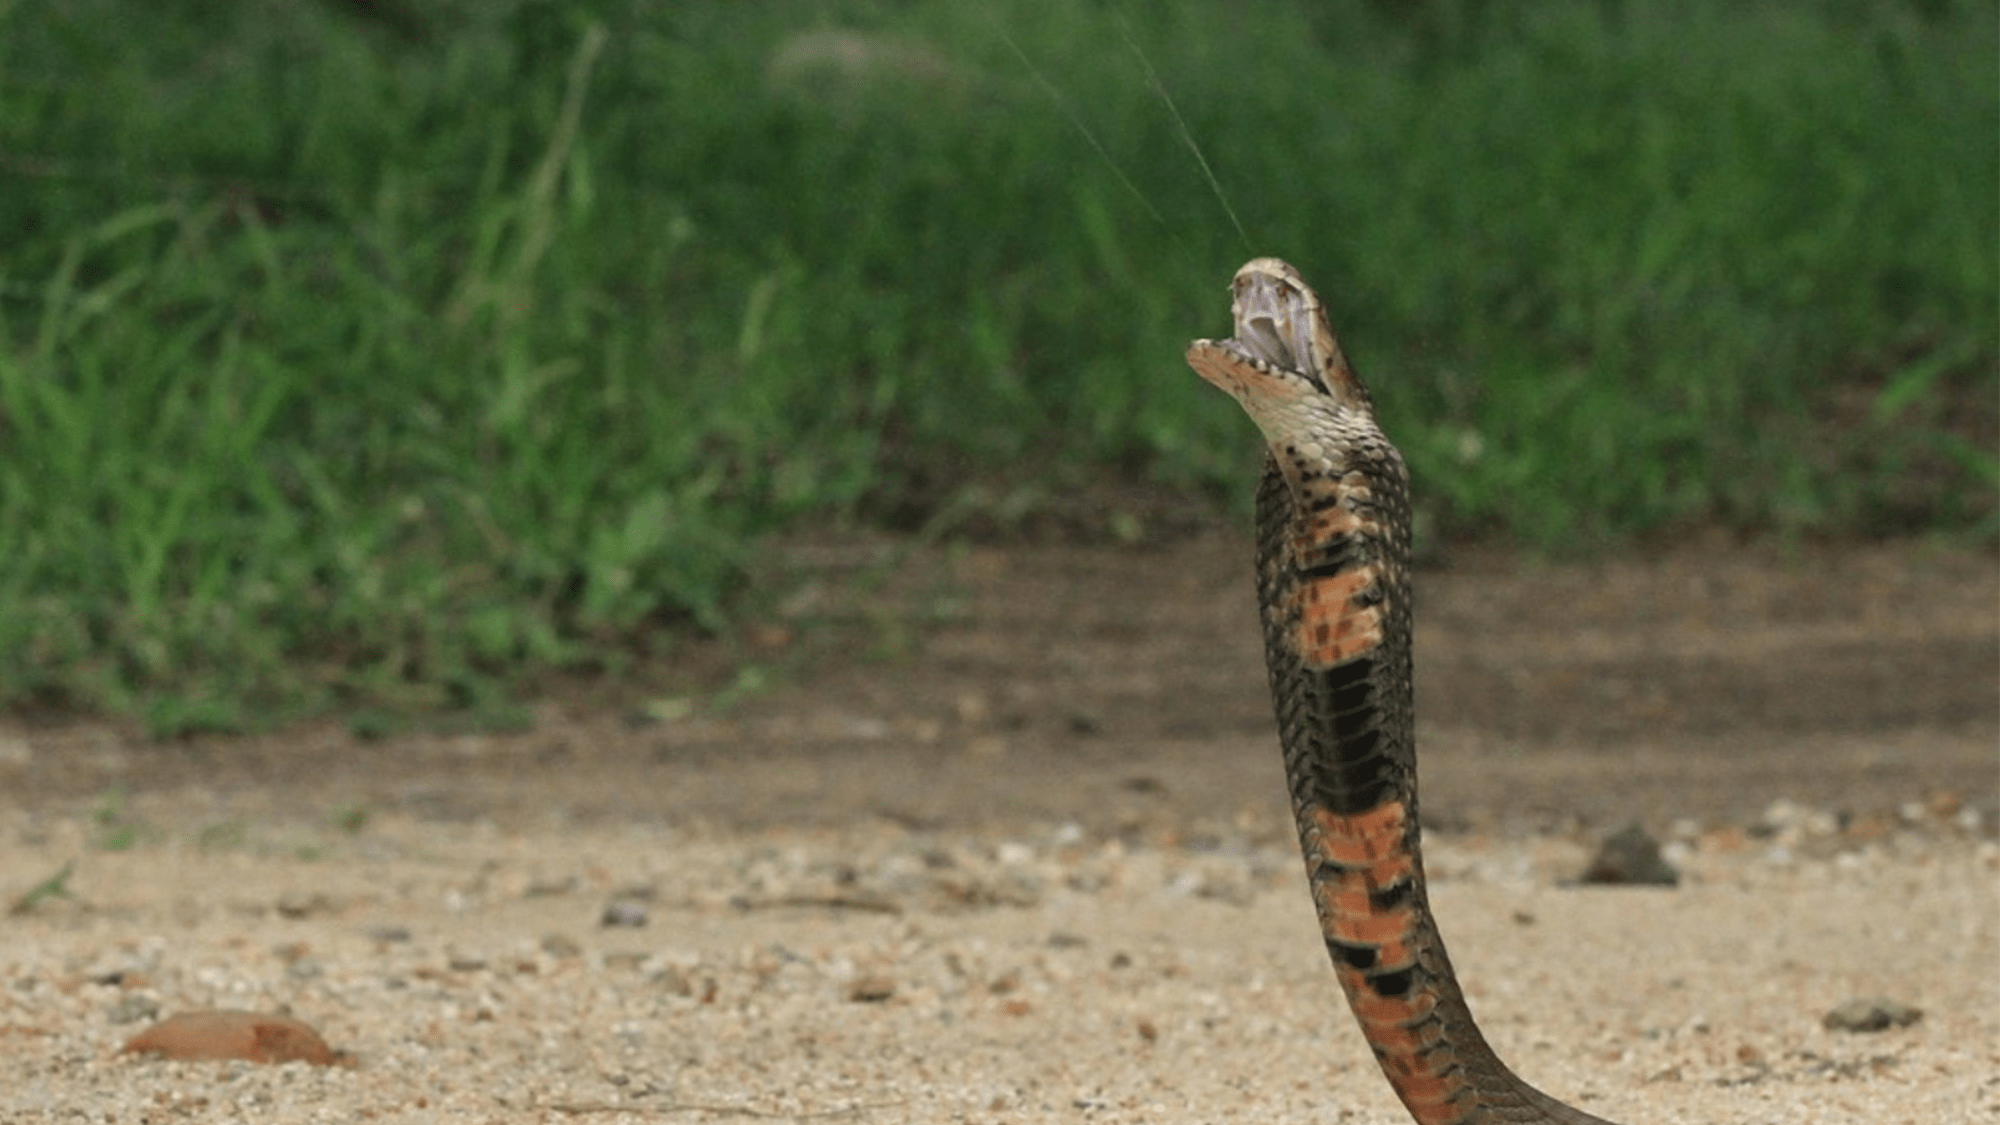 The deadly secrets of snake venom decoded with fake blood vessels